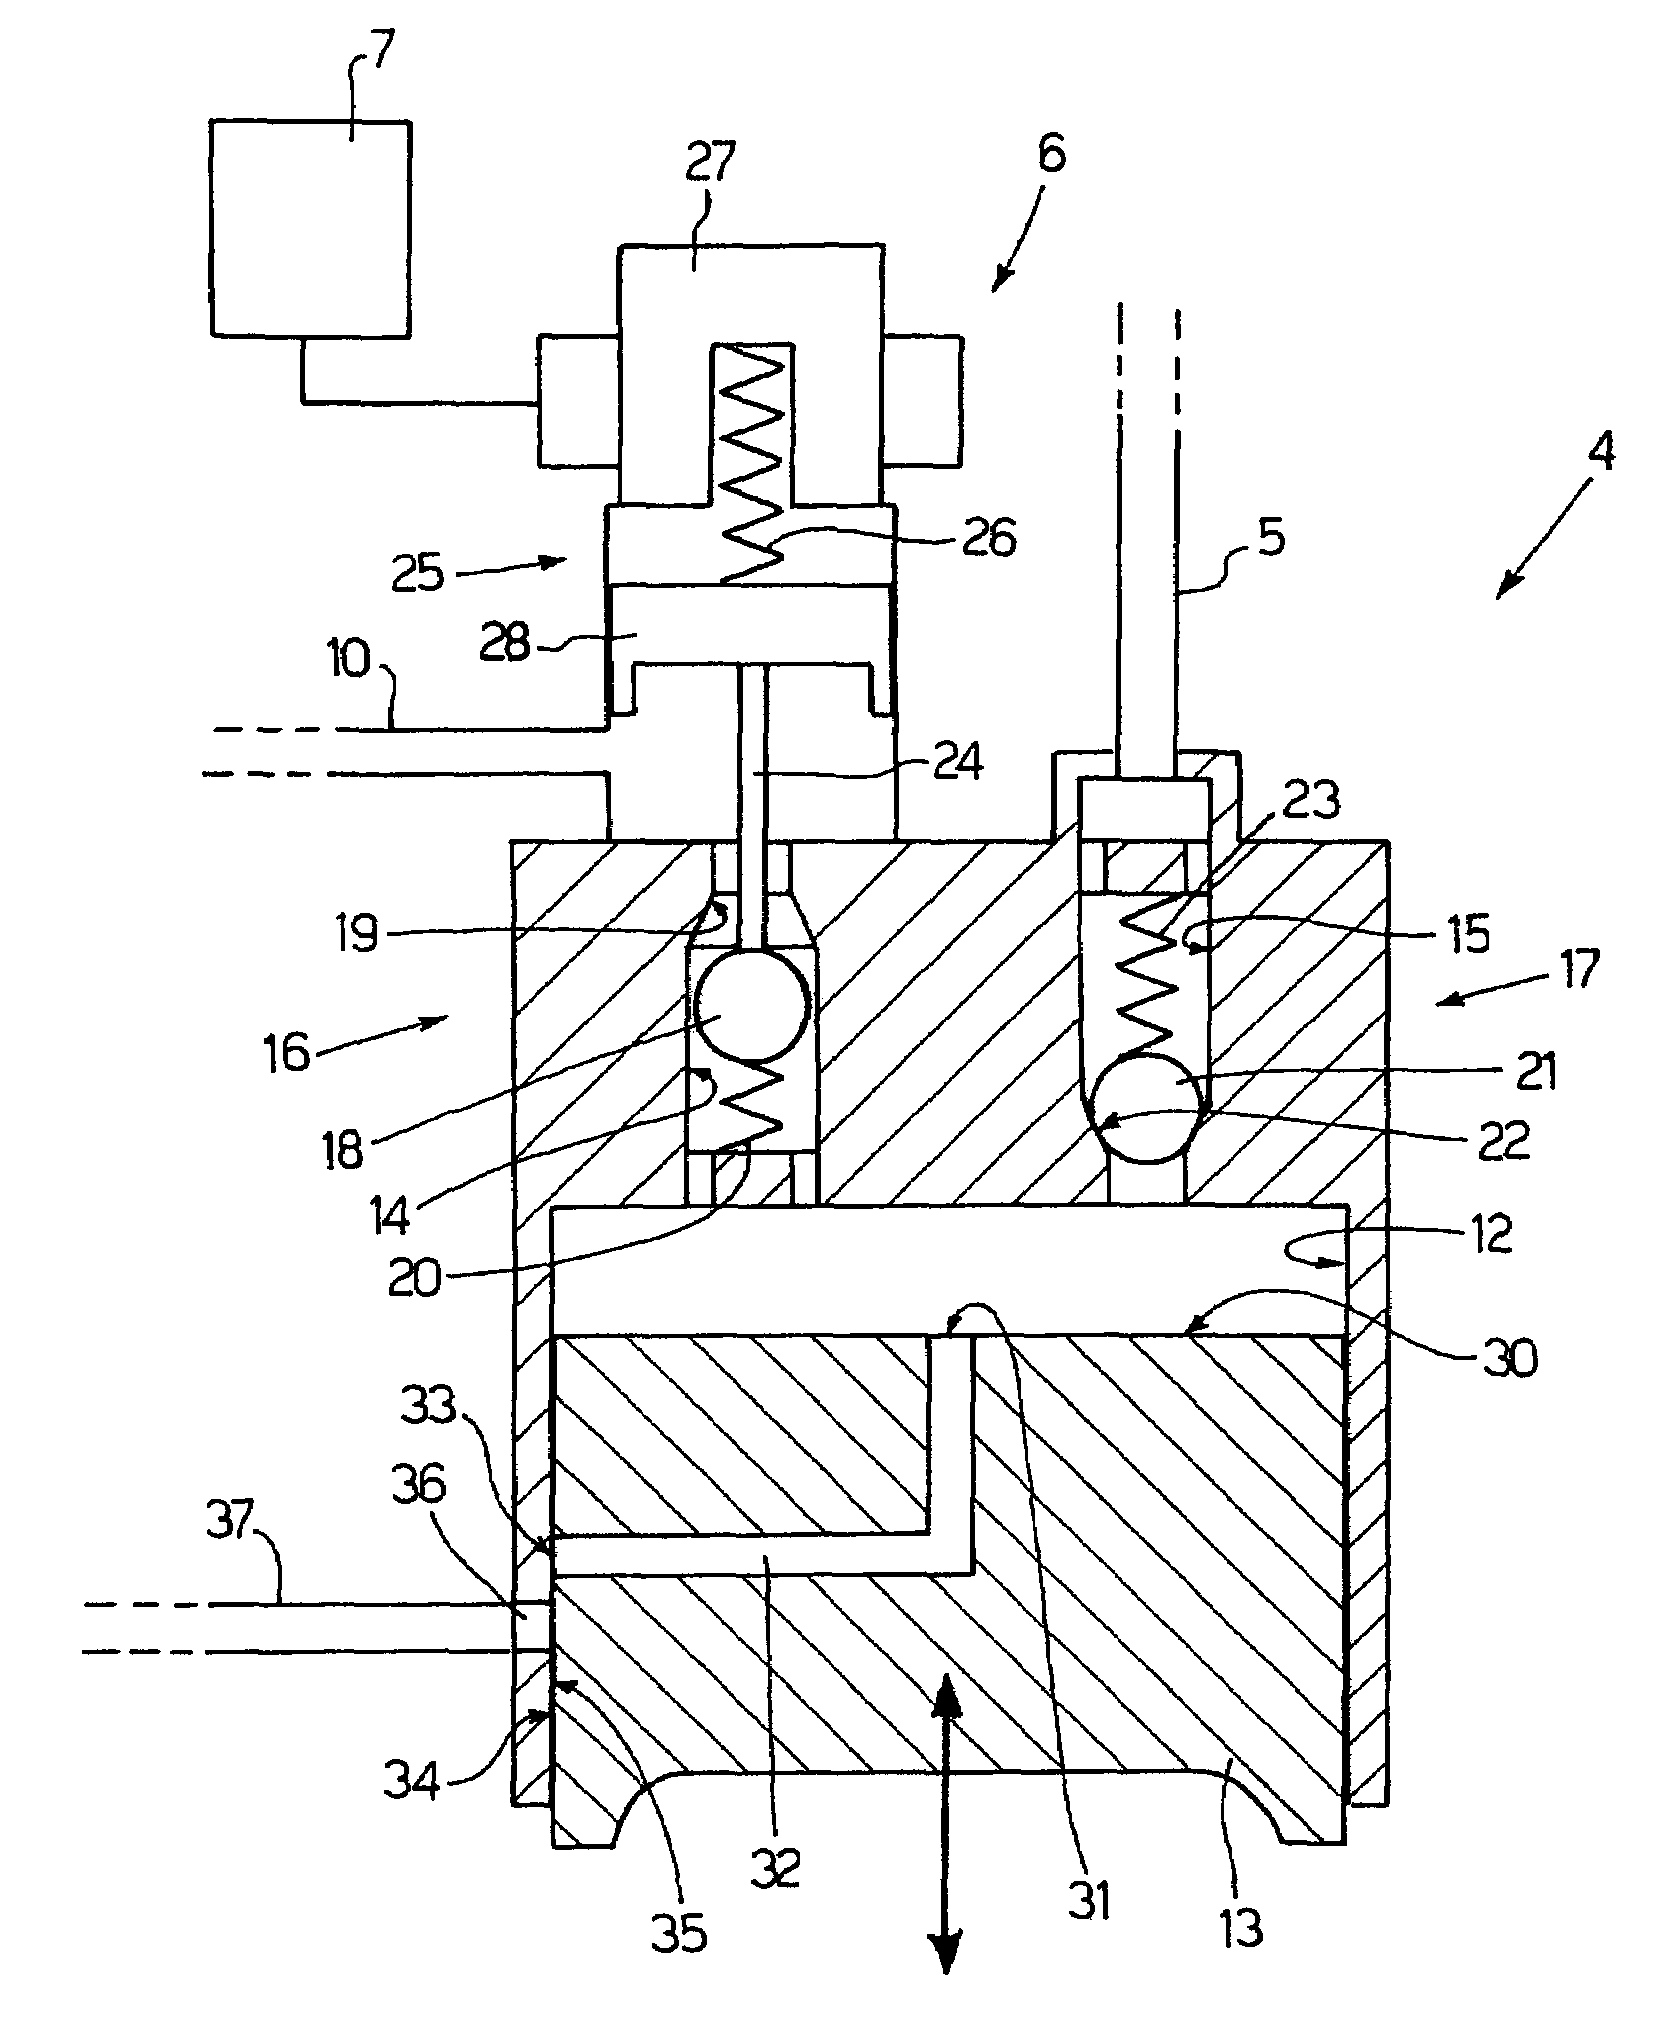 Method and system for the direct injection of fuel into an internal combustion engine